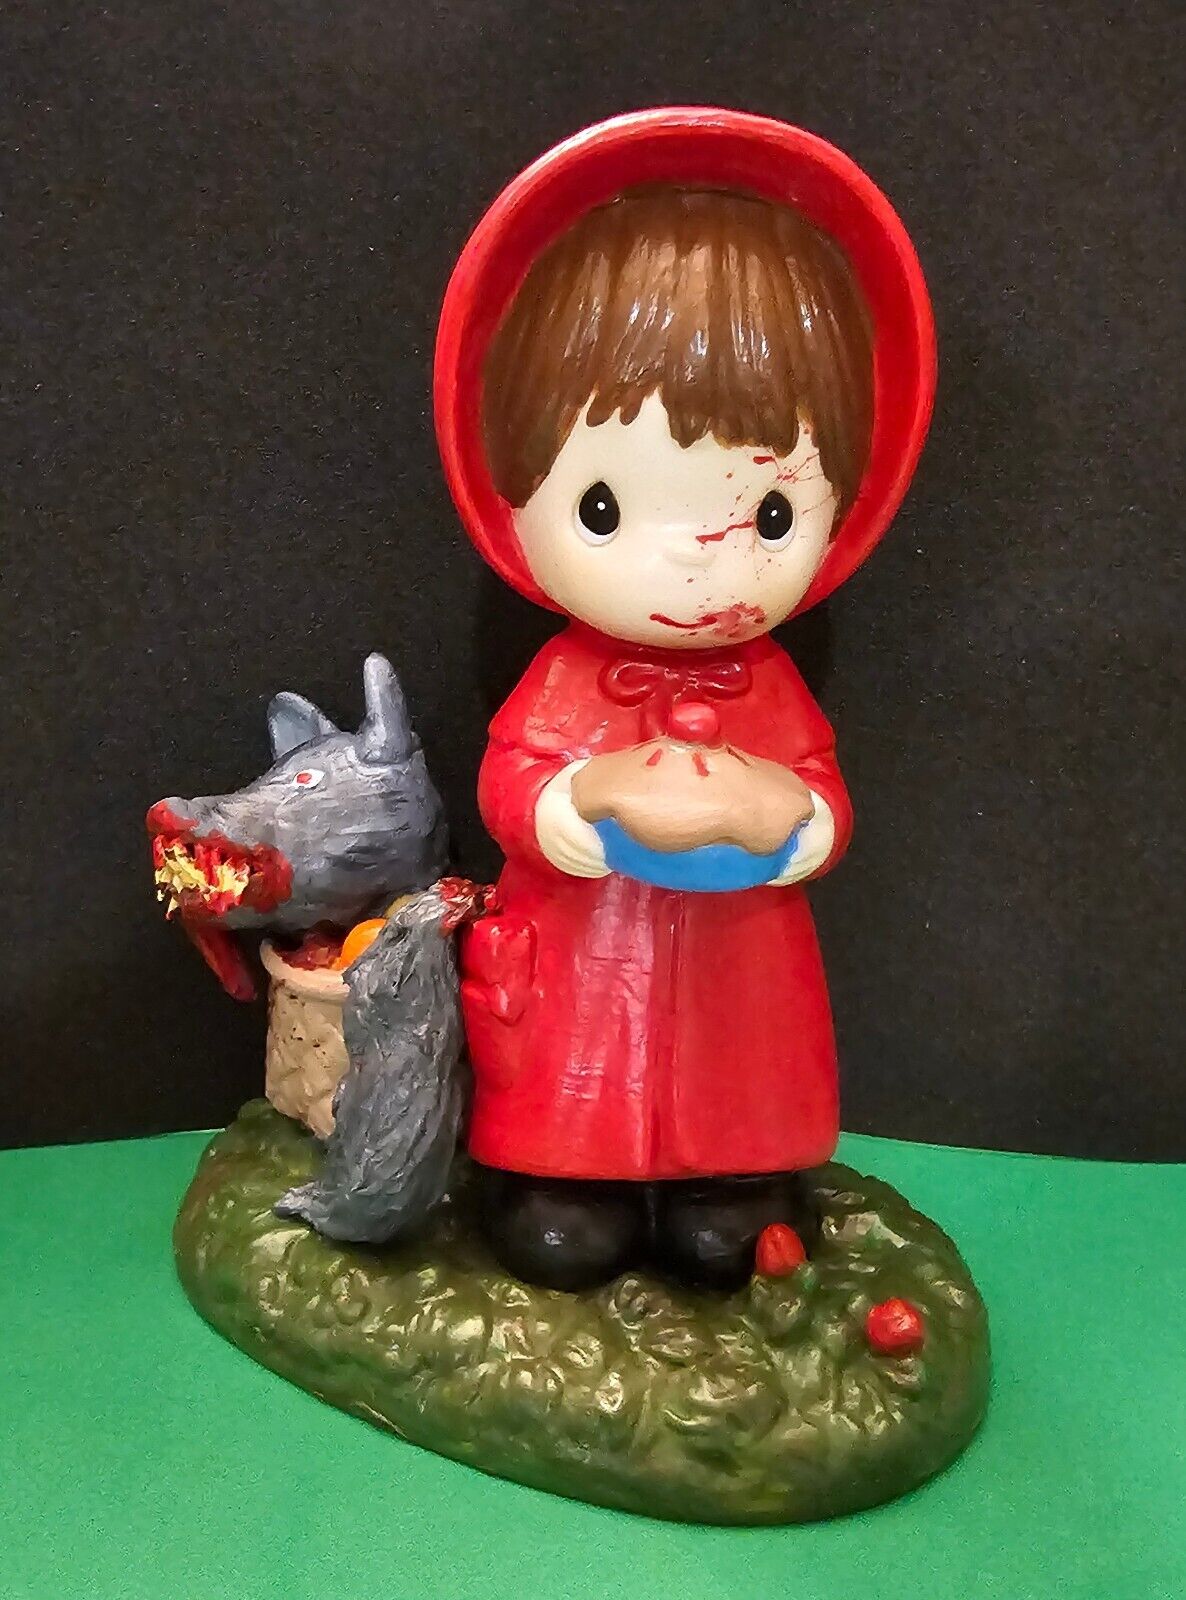 Little Red Riding Hood Precious Moments Altered Figurine Hand painted & crafted